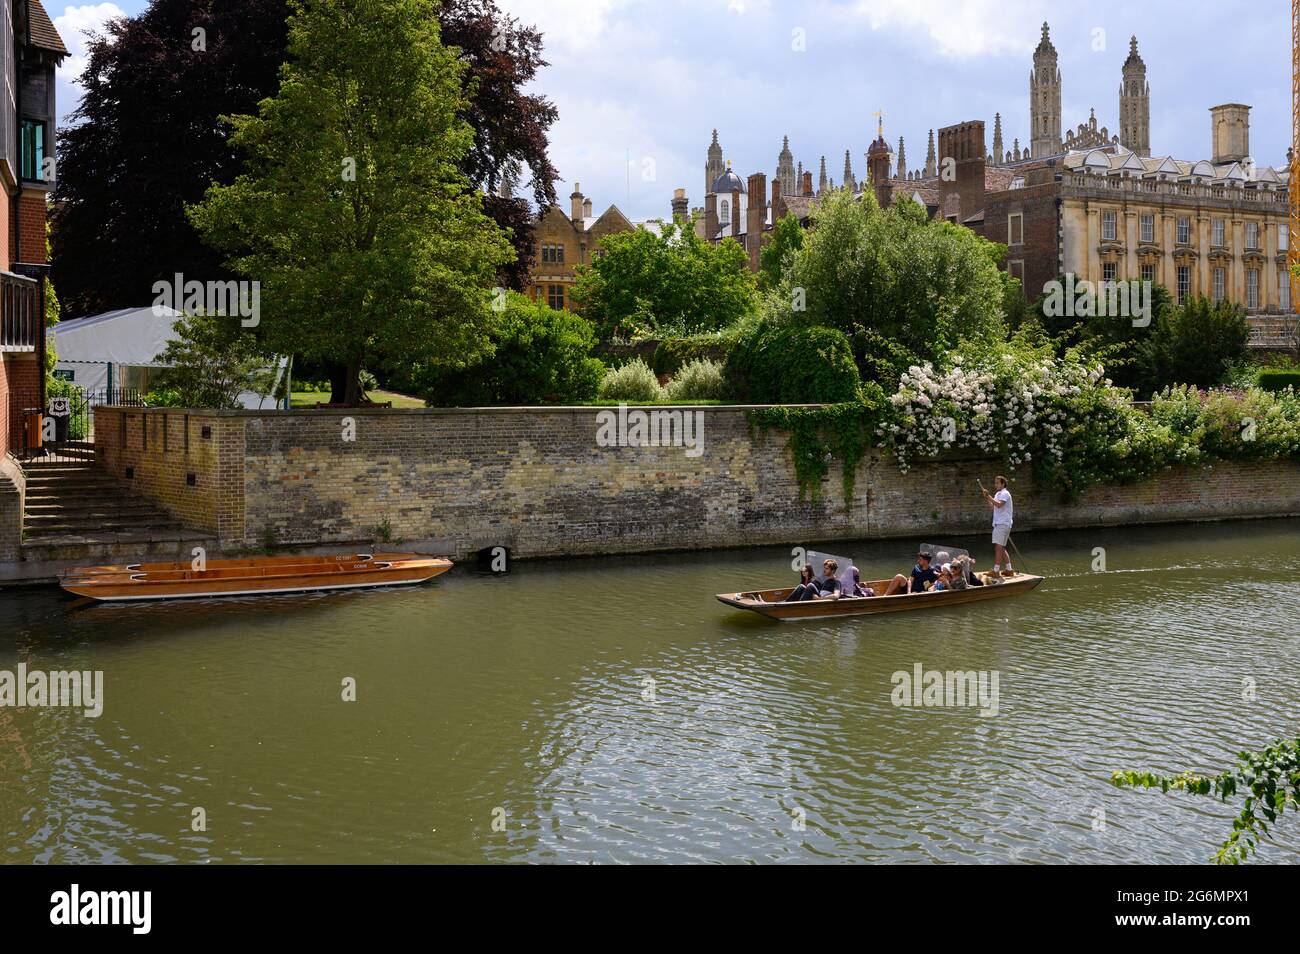 Punting on the River Cam in Cambridge, England. Stockfoto